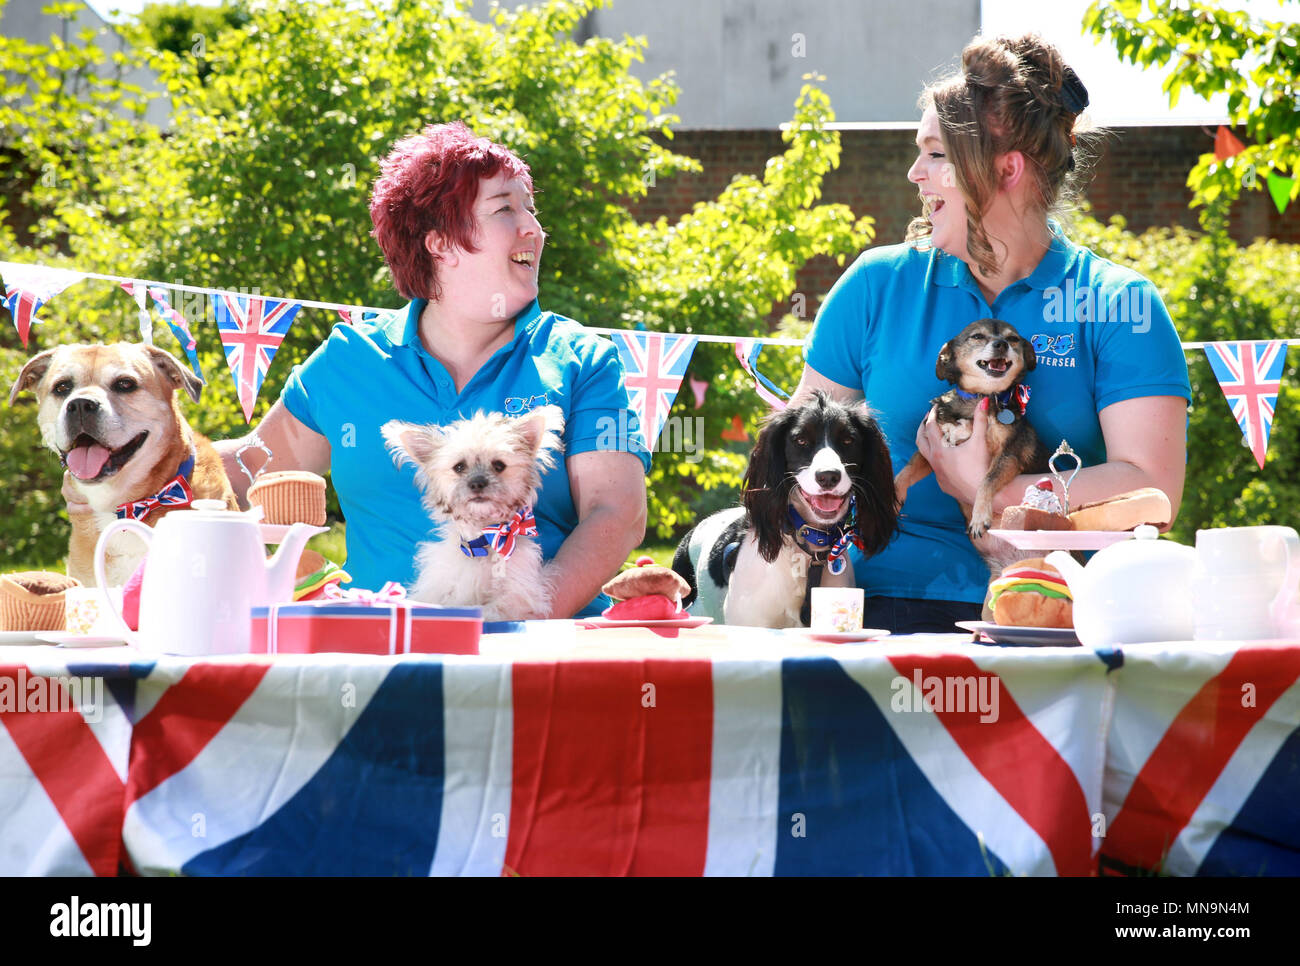 EDITORIAL USE ONLY Battersea Dogs &amp; Cats Home staff Ali Taylor (left) and Katrina Gould and dogs from the charity's Old Windsor centre (left to right) Lola (mongrel), Olive (Bichon Frise cross), Jet (Cocker Spaniel) and Anya (Chihuahua) take part in a street party to celebrate the upcoming royal wedding. Stock Photo